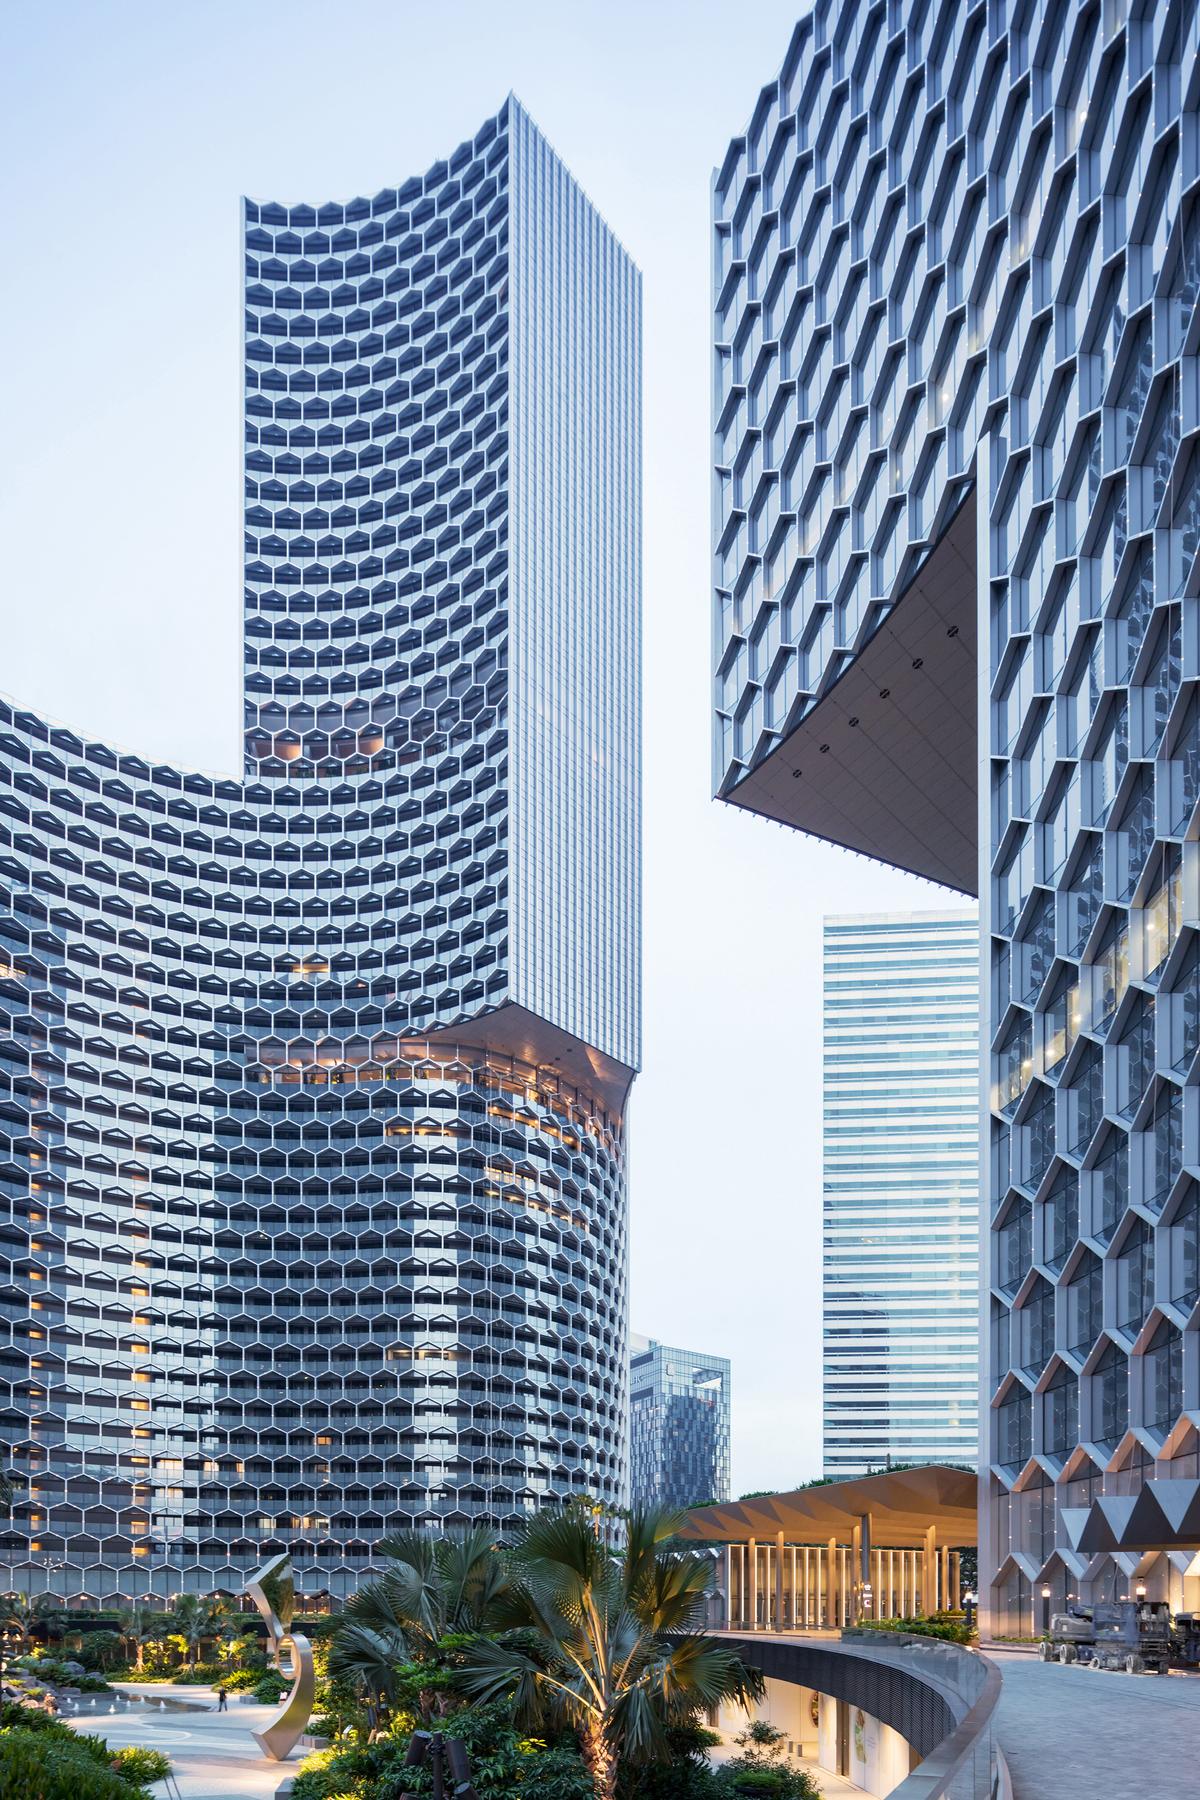 Stretched across the skin of the towers is an intricate honeycomb texture that features a series of hexagonal sunshades / Iwan Baan